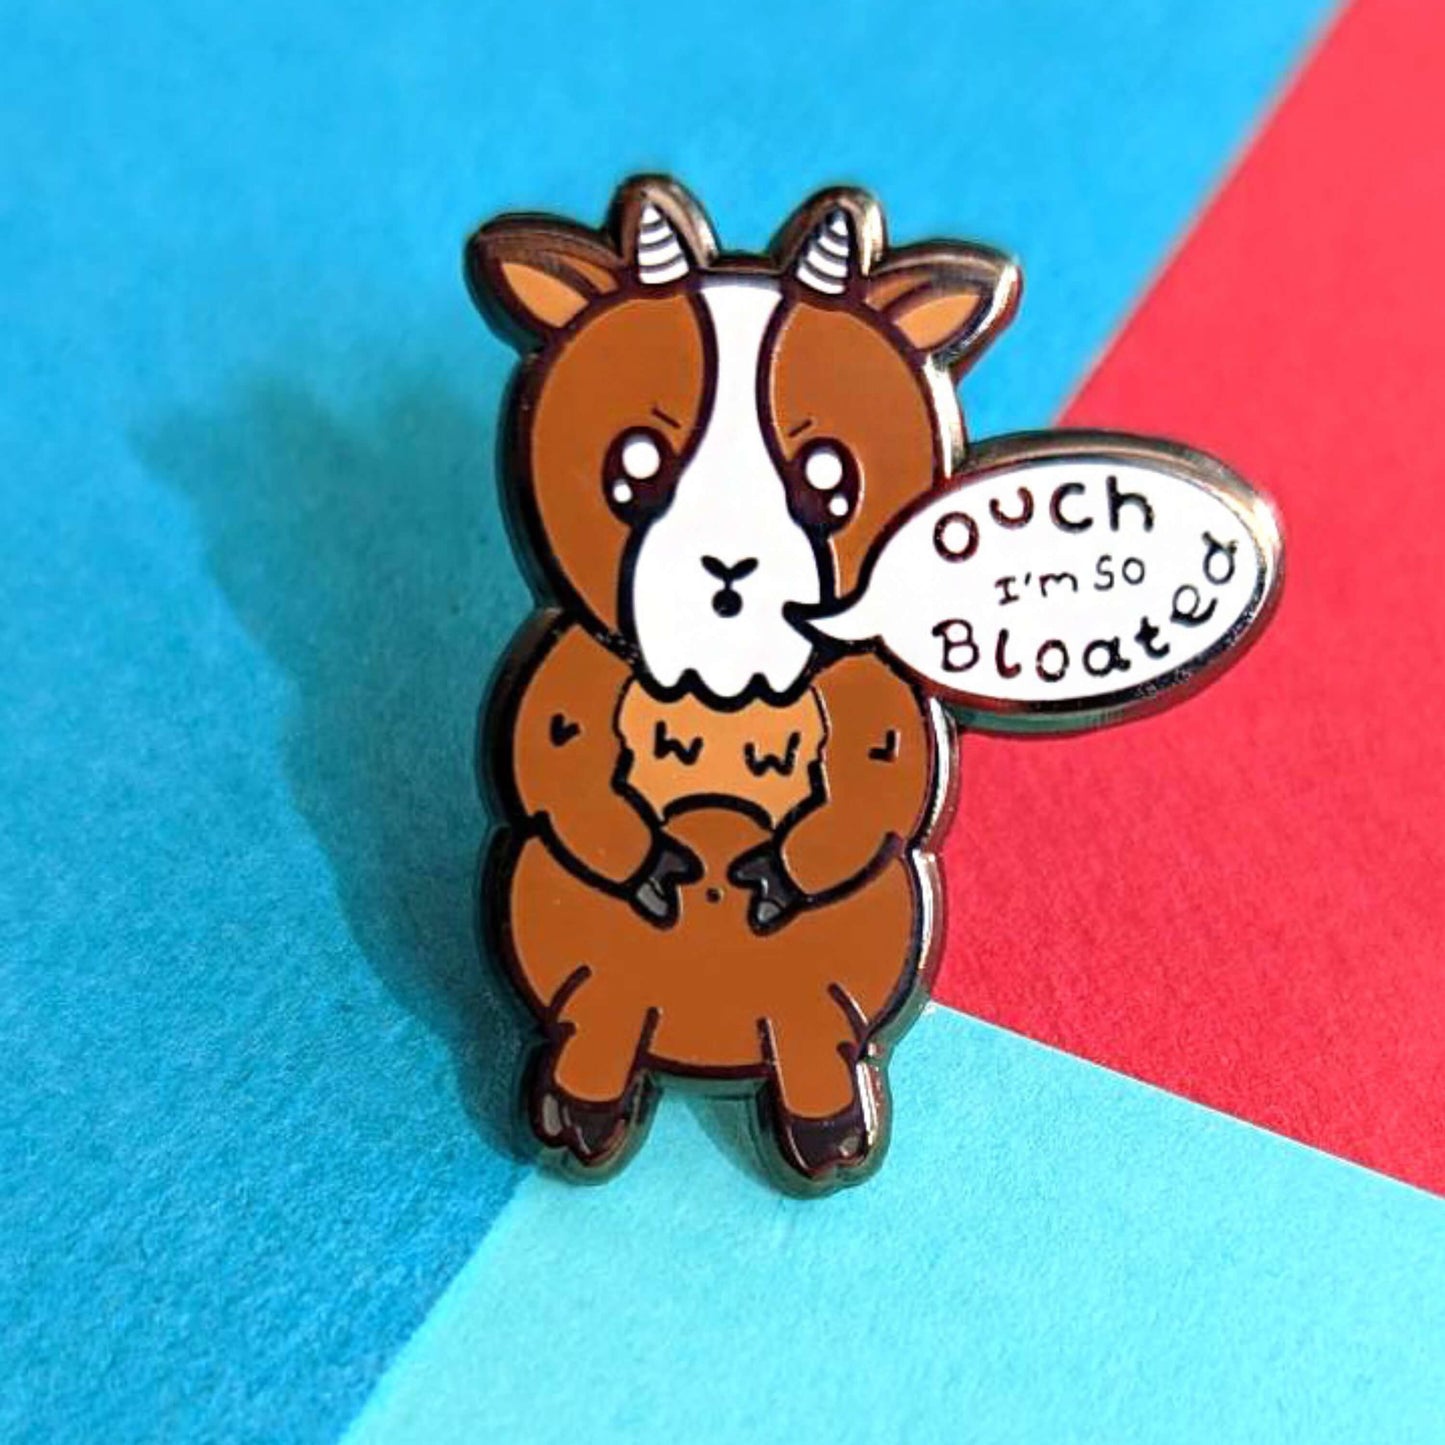 The Bloat Goat Enamel Pin on a red and blue background. The brown frustrated goat pin badge is stood up clutching its tummy with a speech bubble reading 'ouch I'm so bloated'. The hand drawn design is raising awareness for chronic illnesses or hidden disabilities that cause bloating.